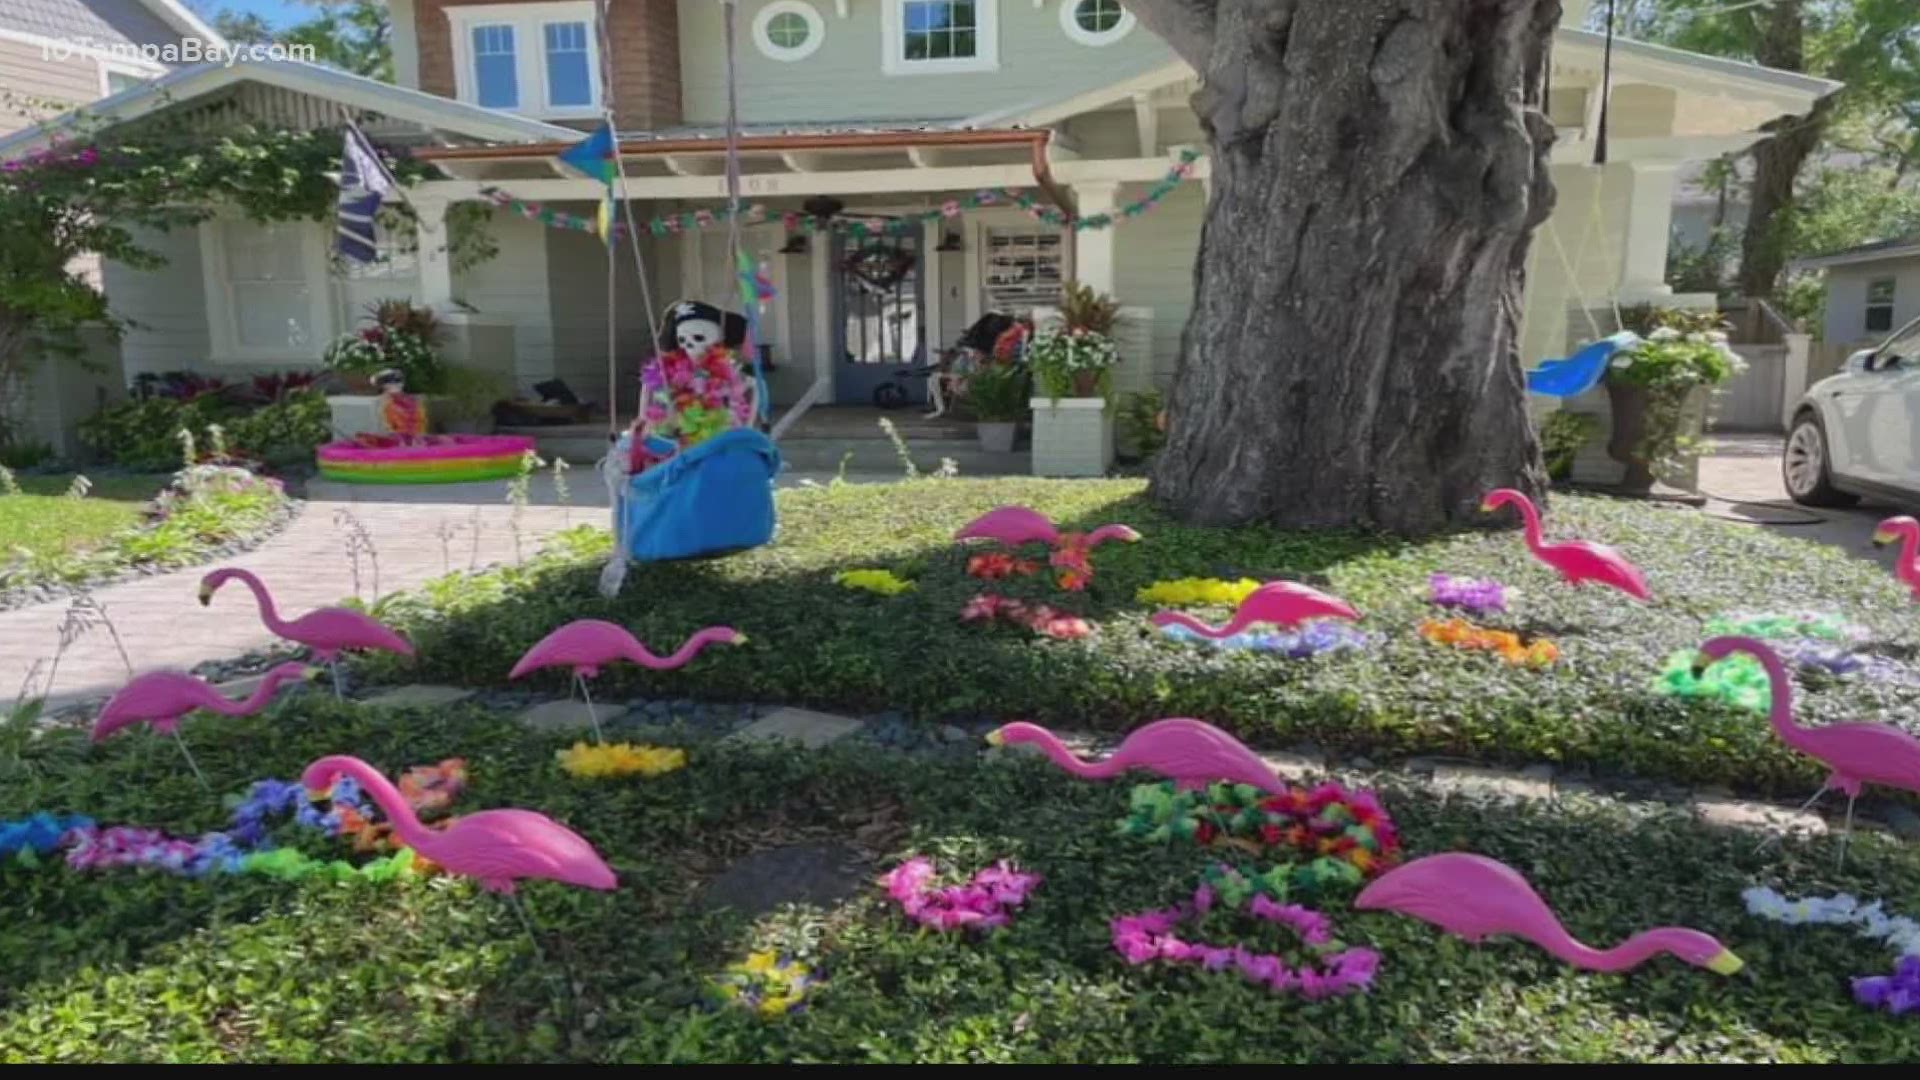 Homeowners found a creative way to celebrate the festival safely.